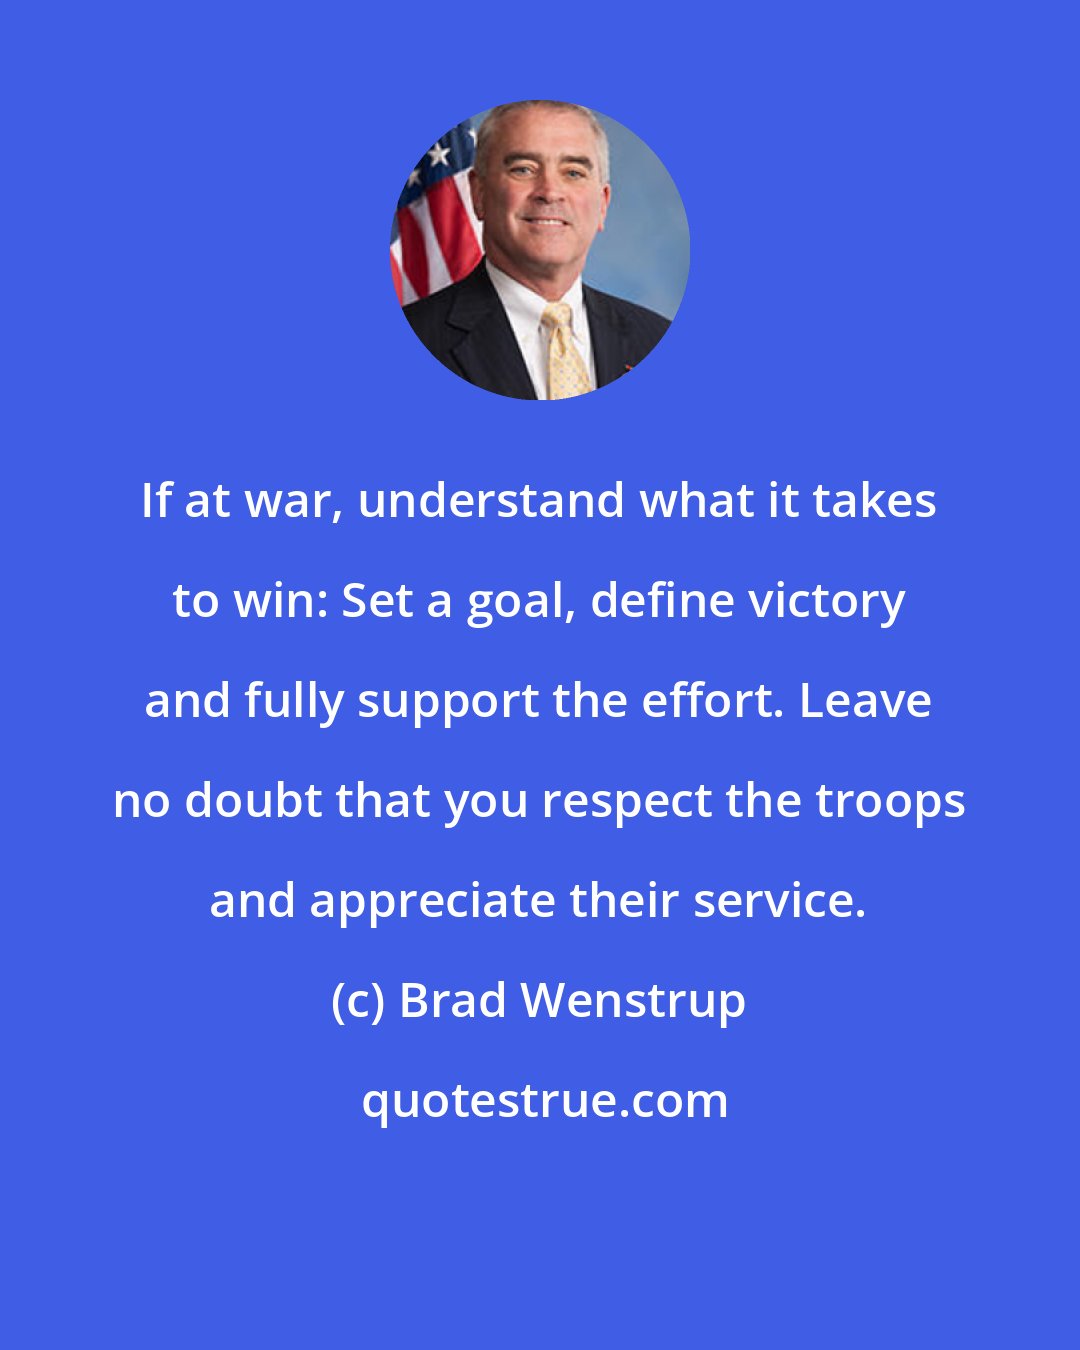 Brad Wenstrup: If at war, understand what it takes to win: Set a goal, define victory and fully support the effort. Leave no doubt that you respect the troops and appreciate their service.